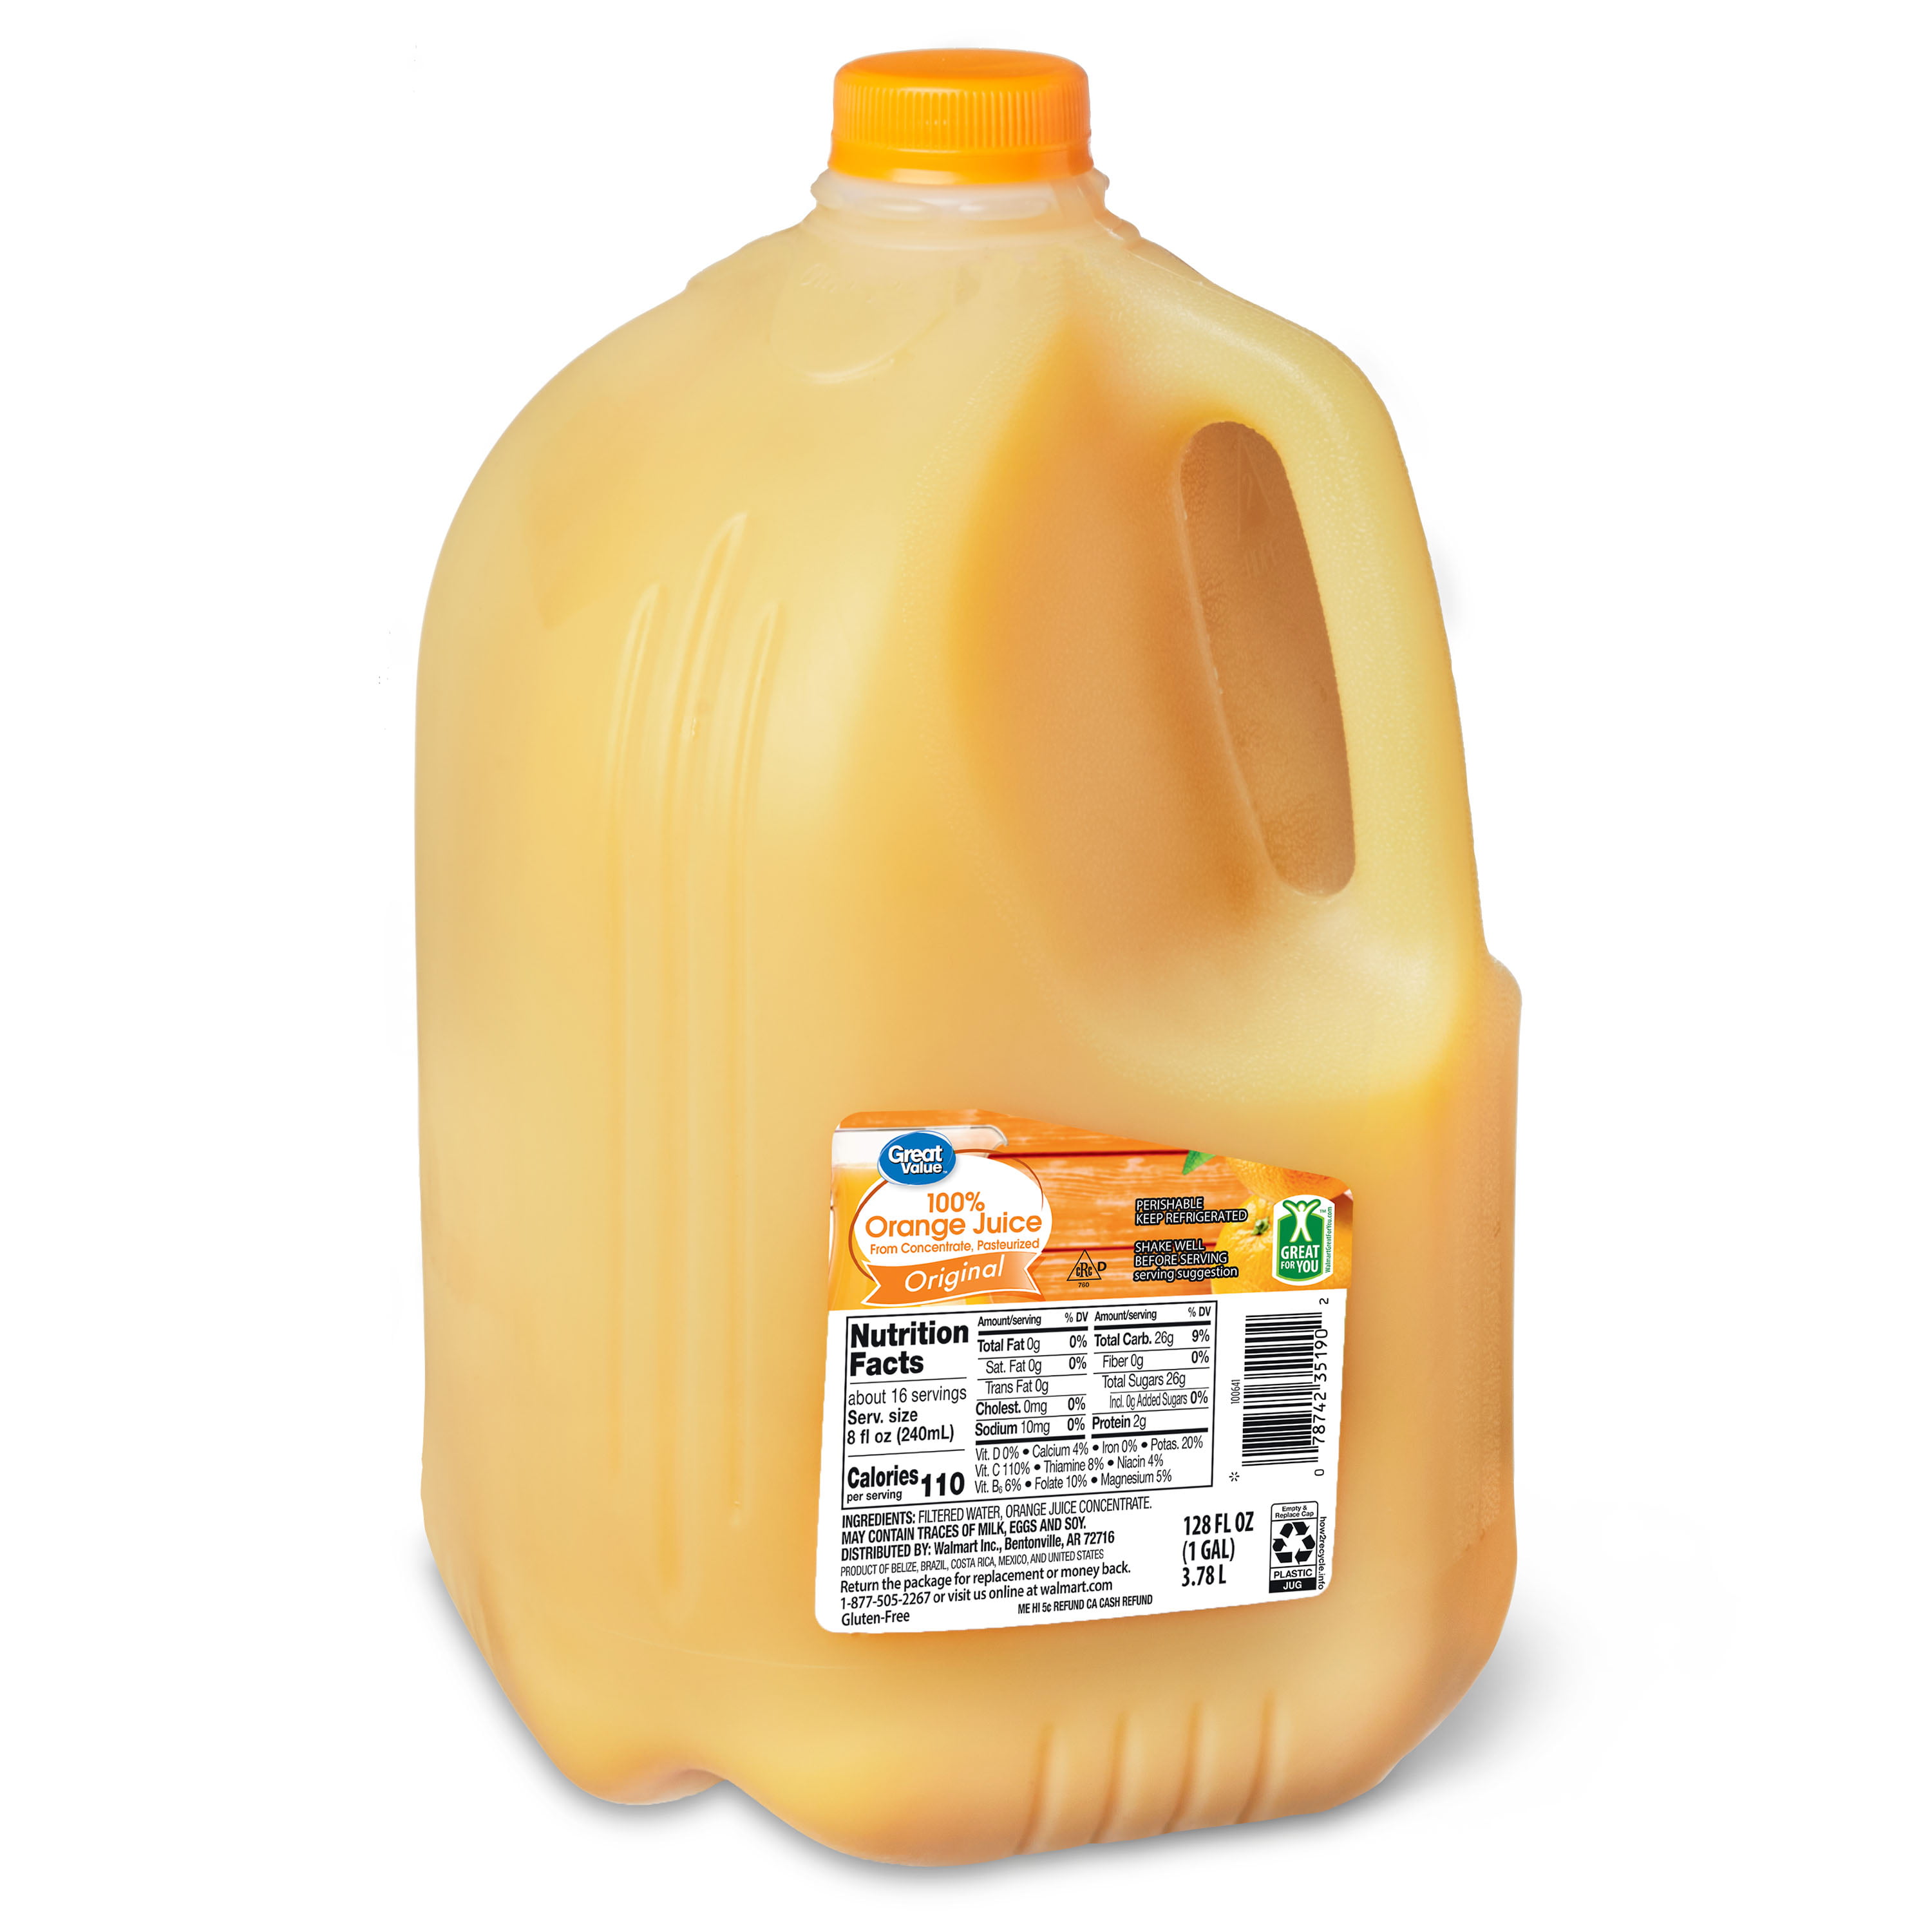 How Many Oranges In A Gallon Of Orange Juice